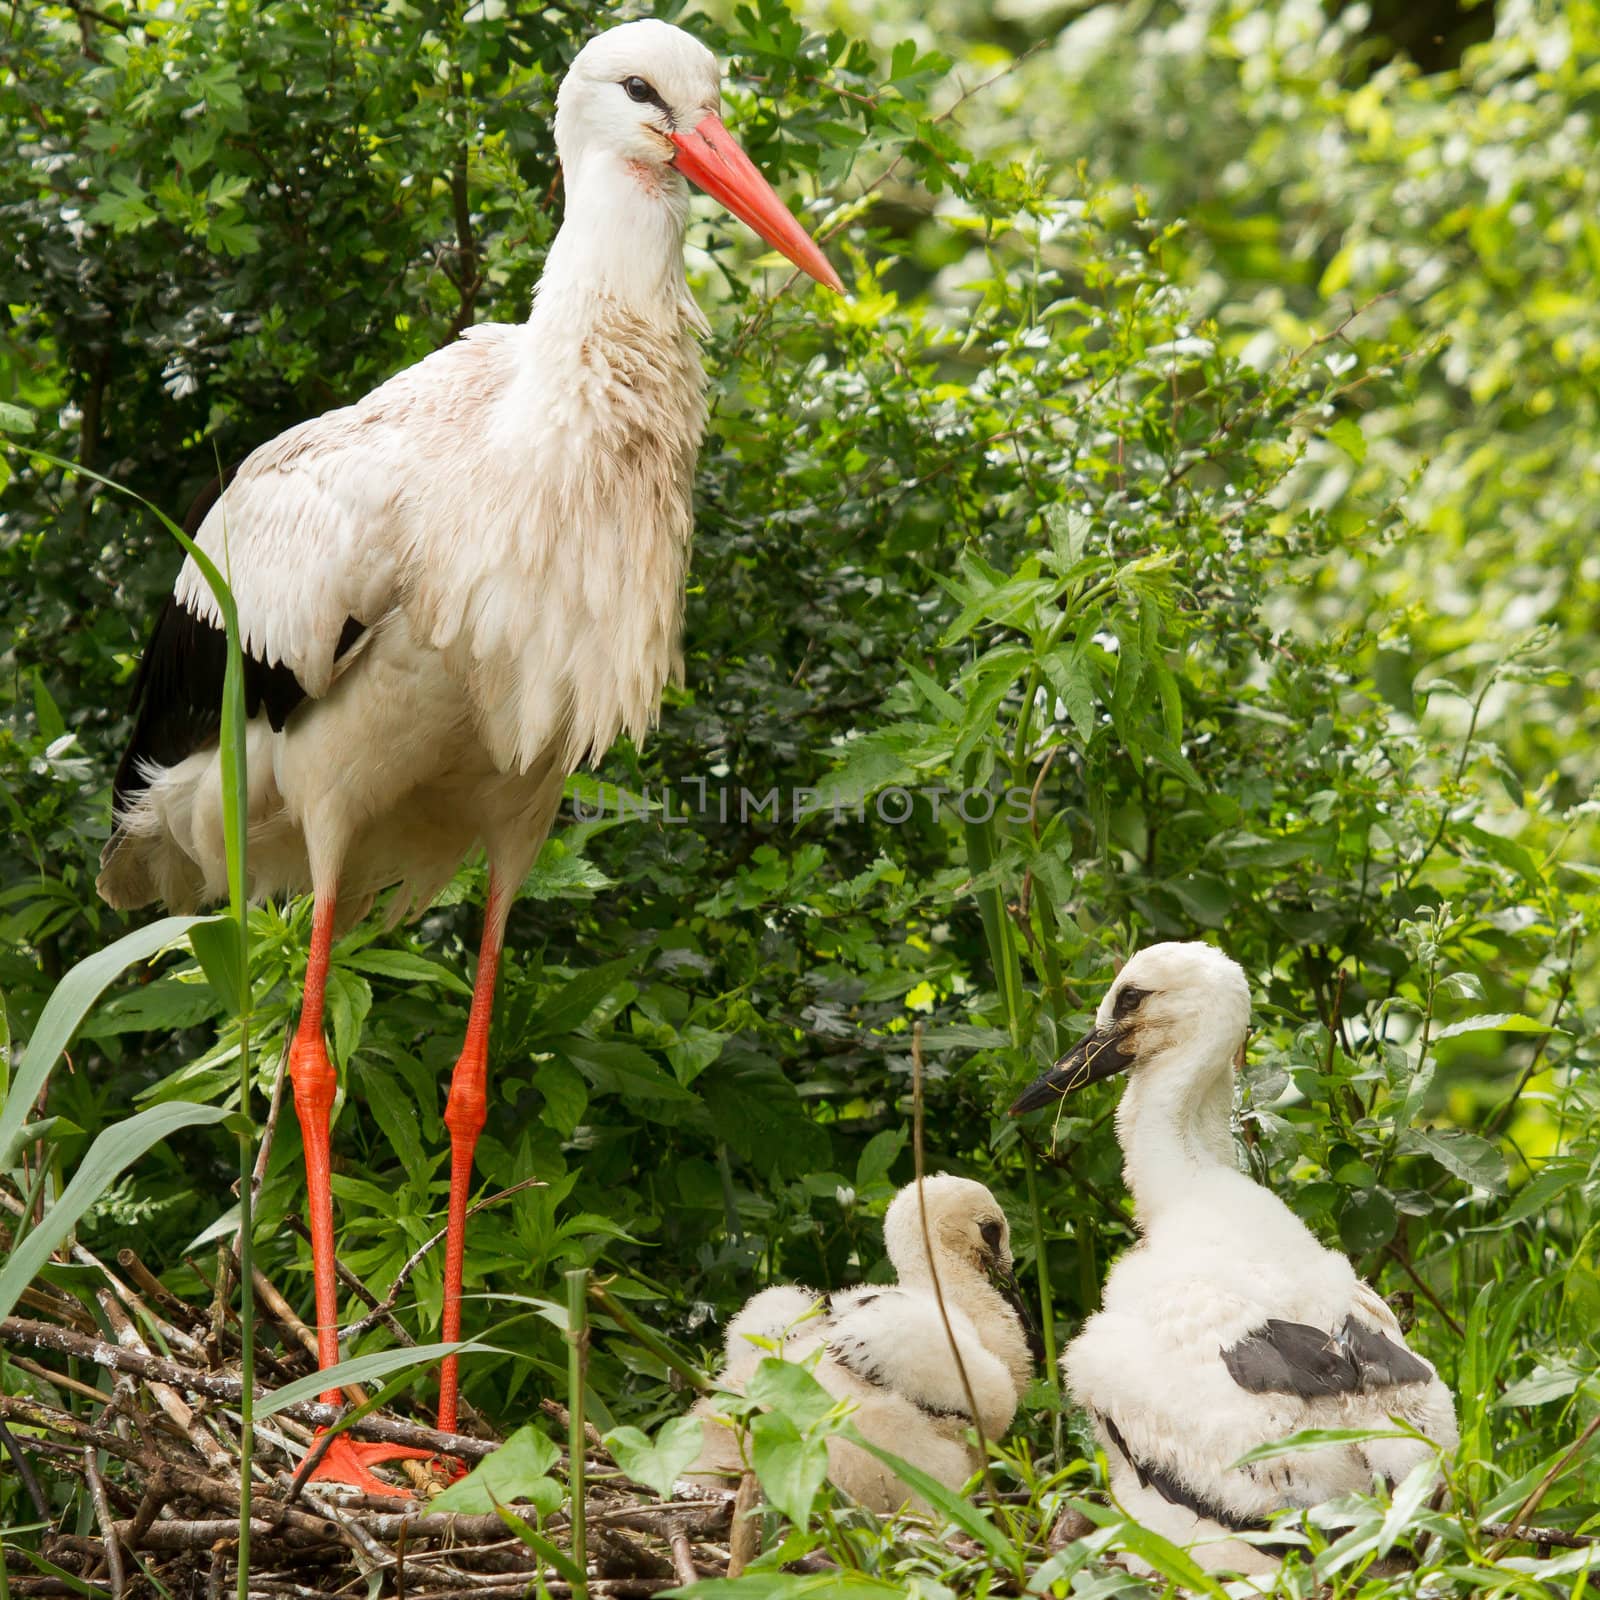 Stork with two chicks by michaklootwijk